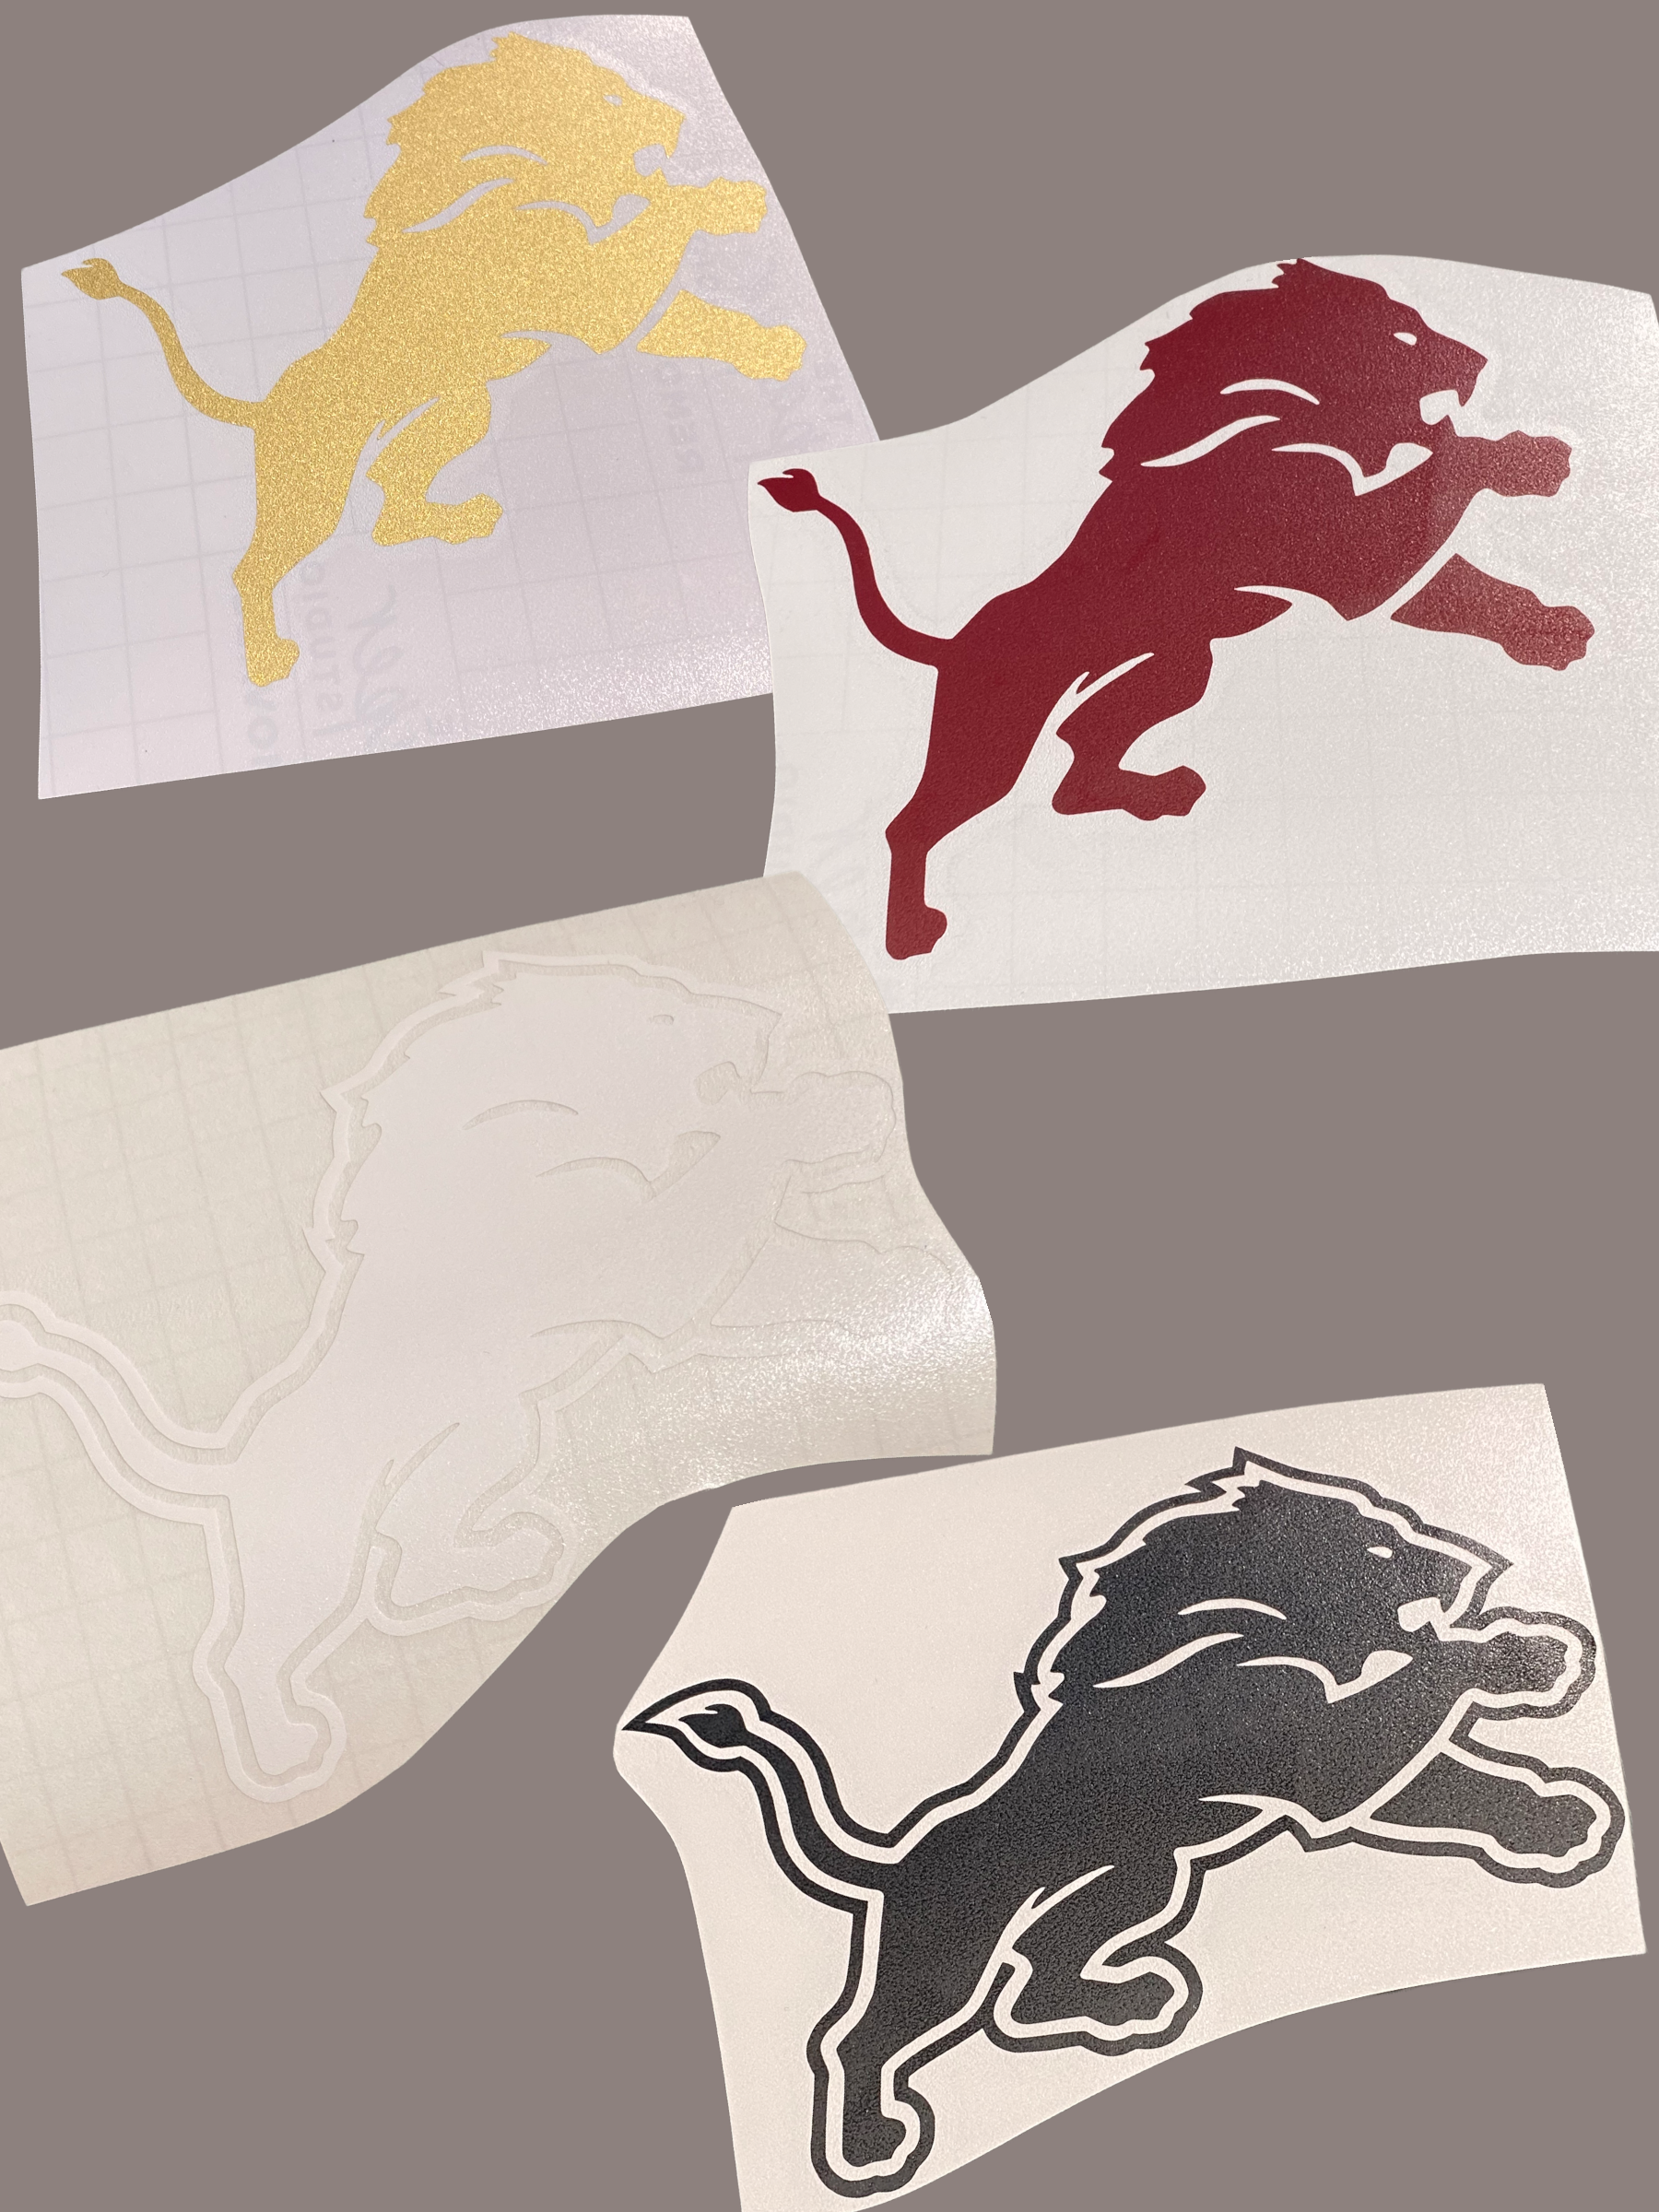 Leaping Lion decal 5" TG